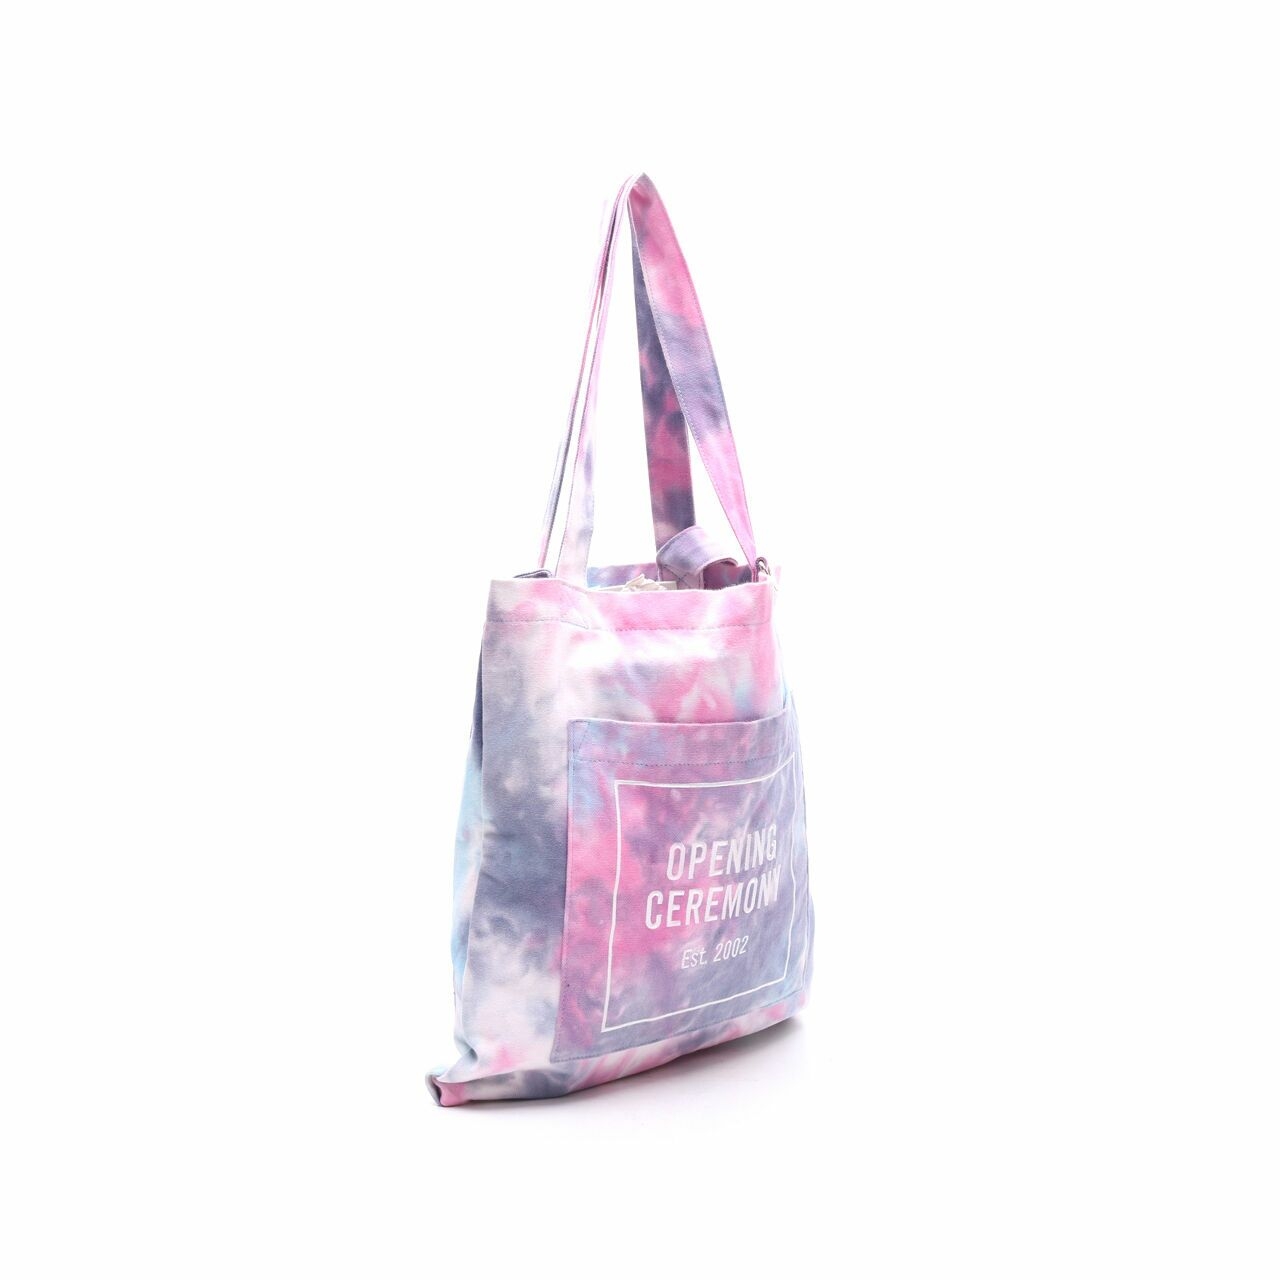 Opening Ceremony Multicolor Tote Bag